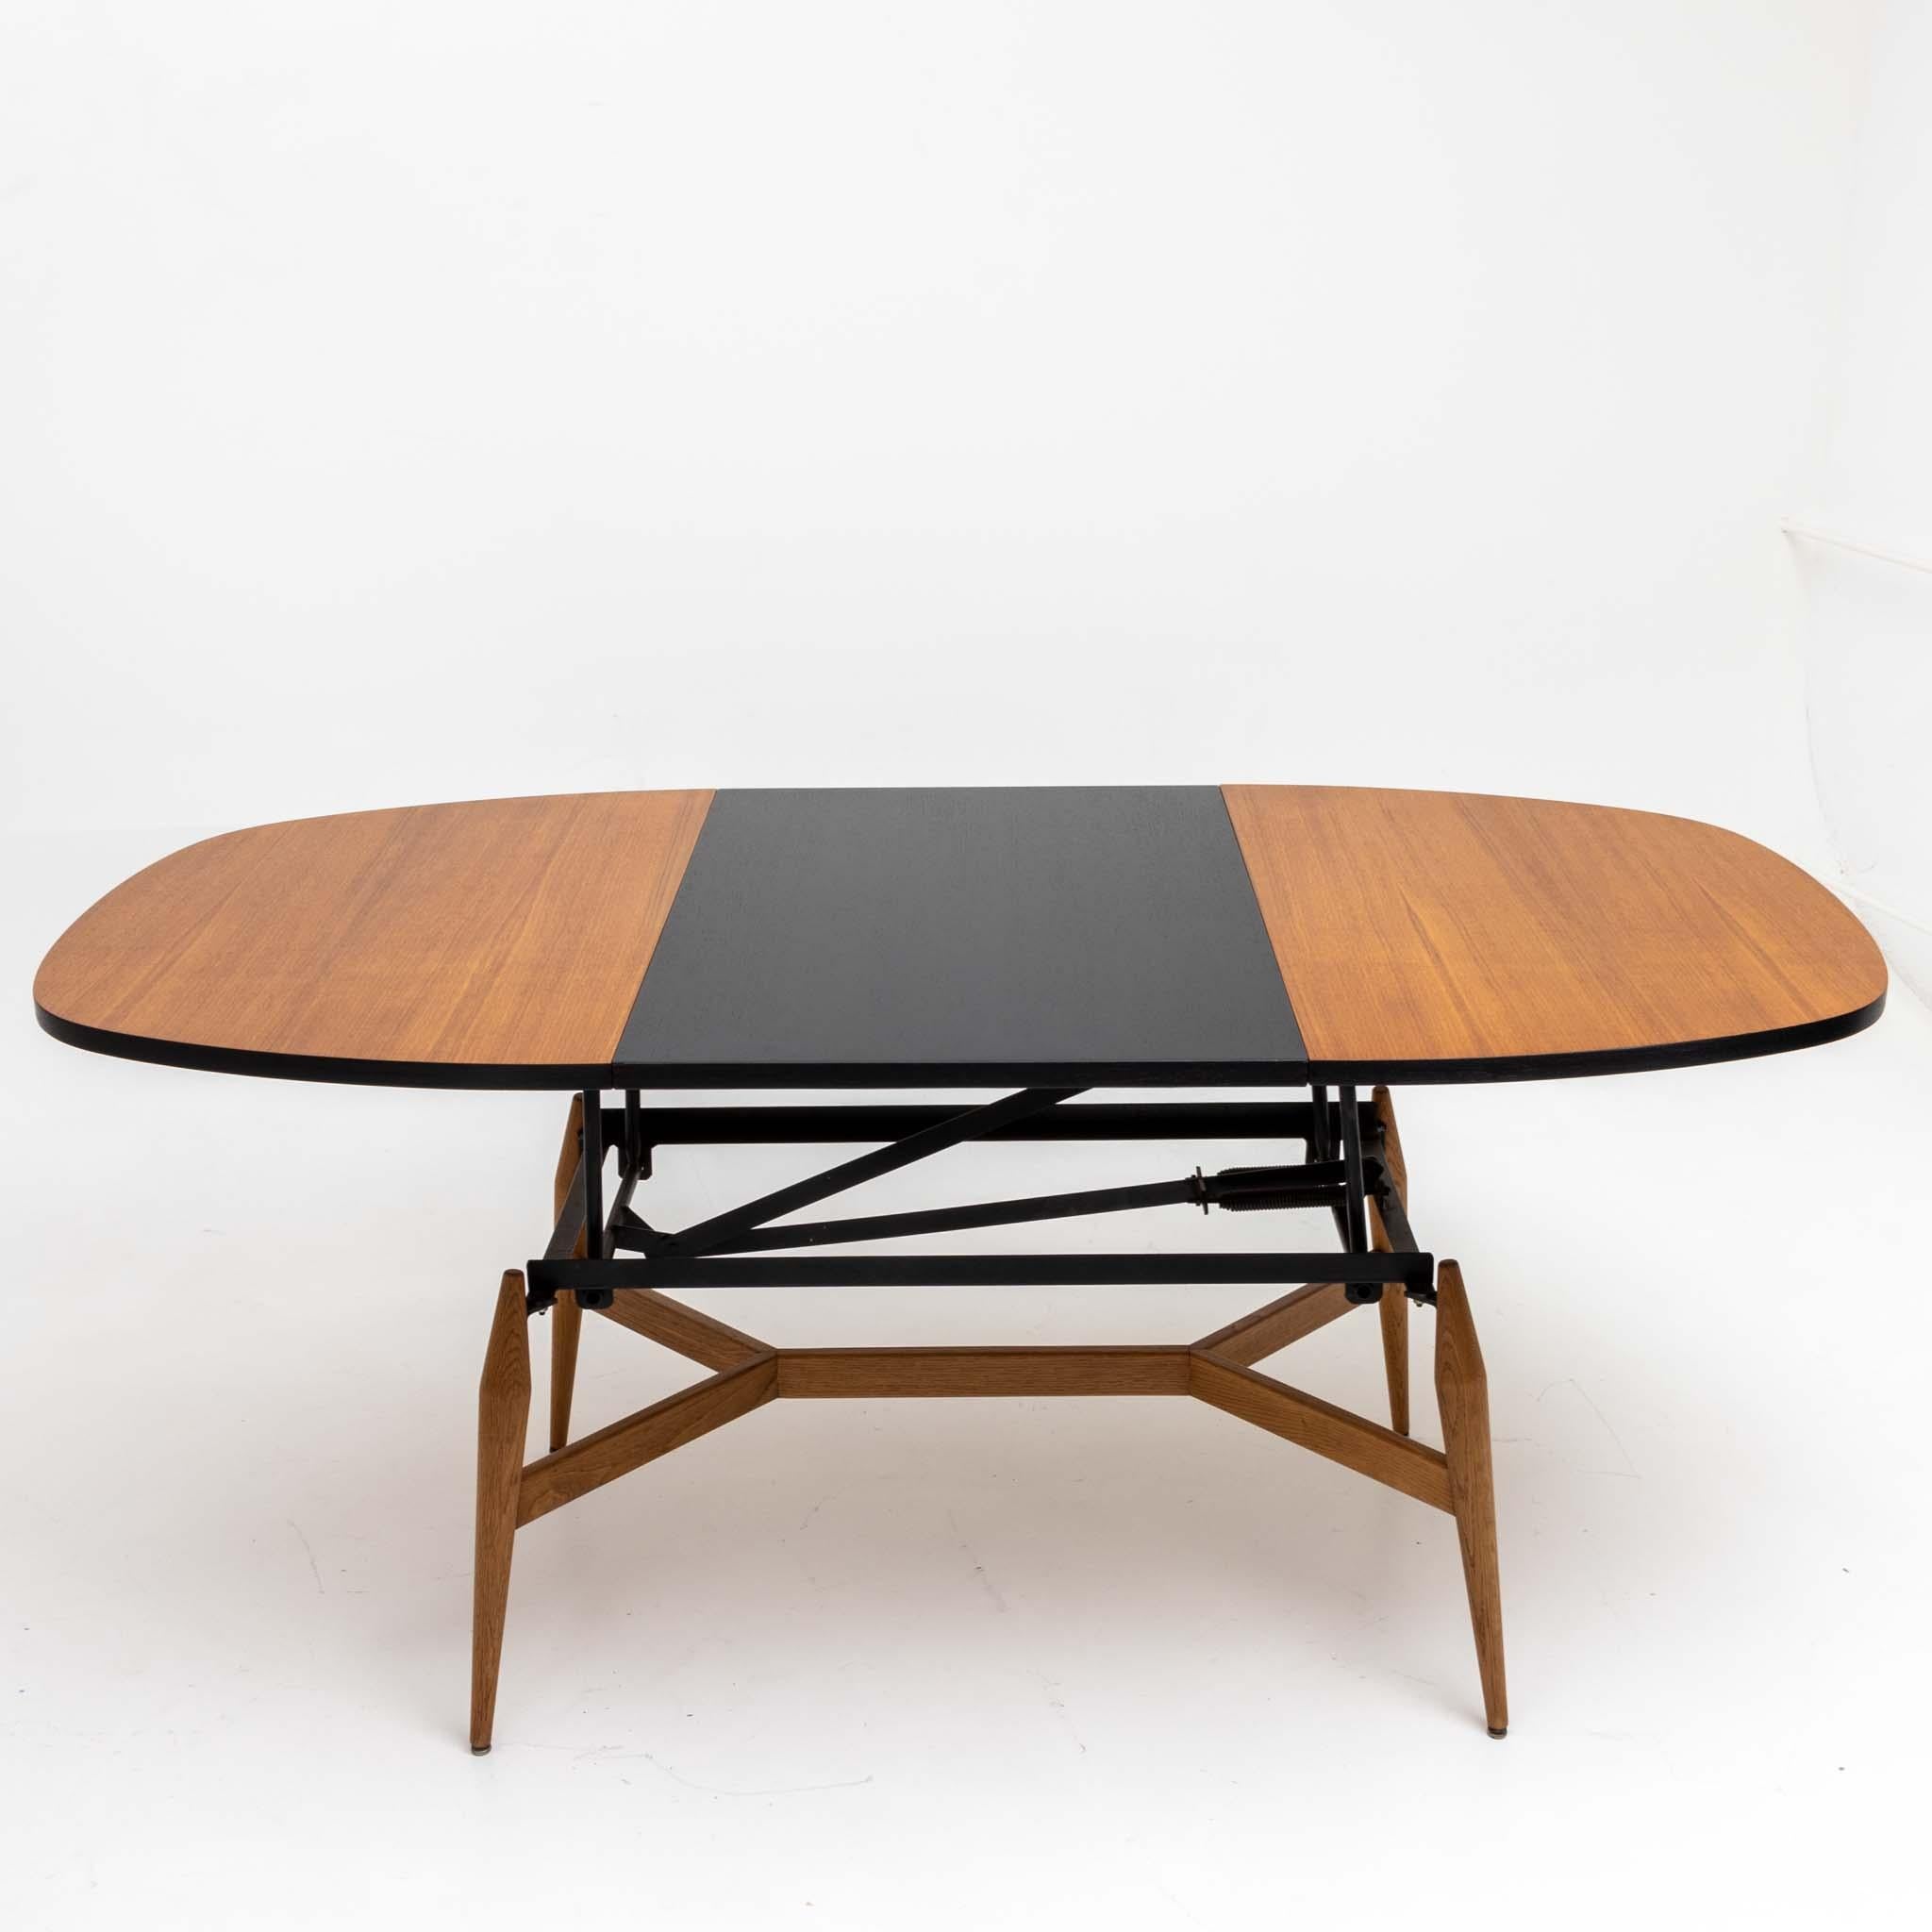 Multifunctional Table, Mid-20th Century In Good Condition For Sale In Greding, DE